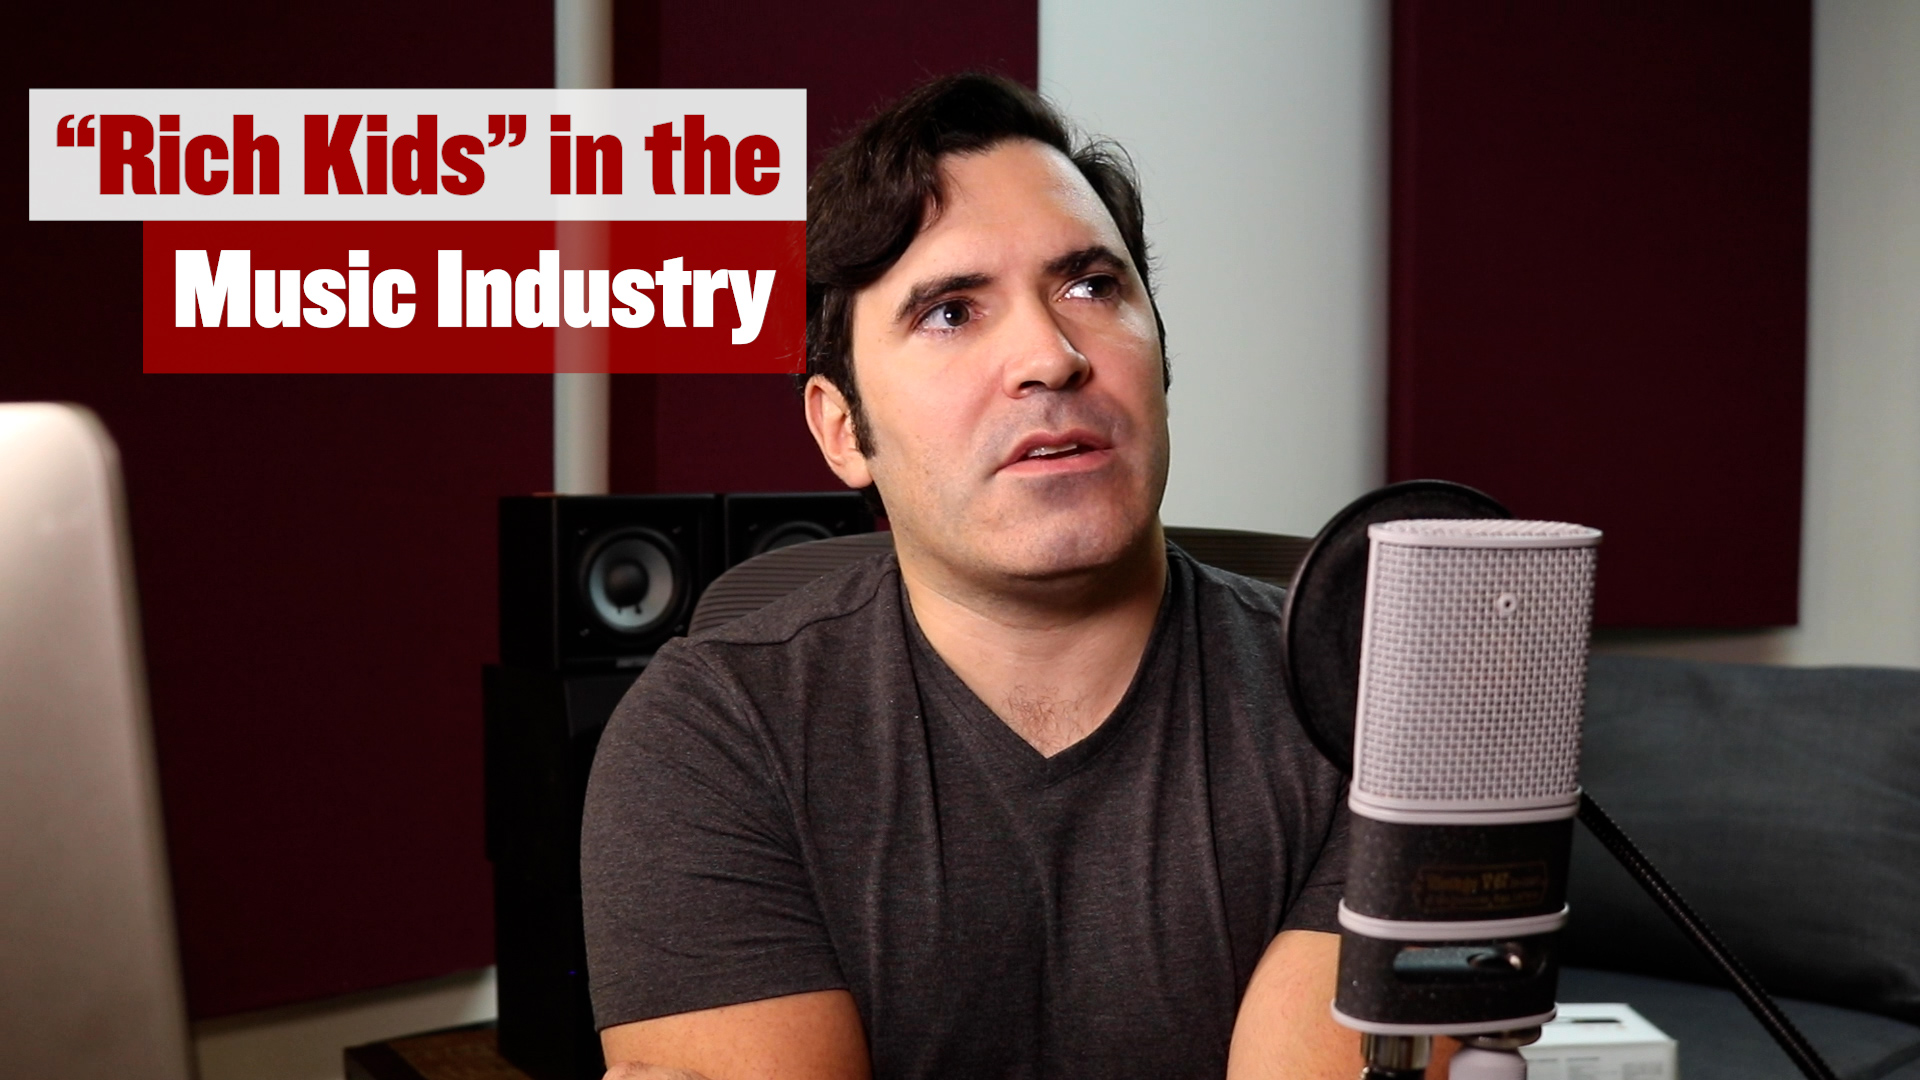 “Rich Kids in the Music Industry”: Is Money Really What Makes Success in Music?